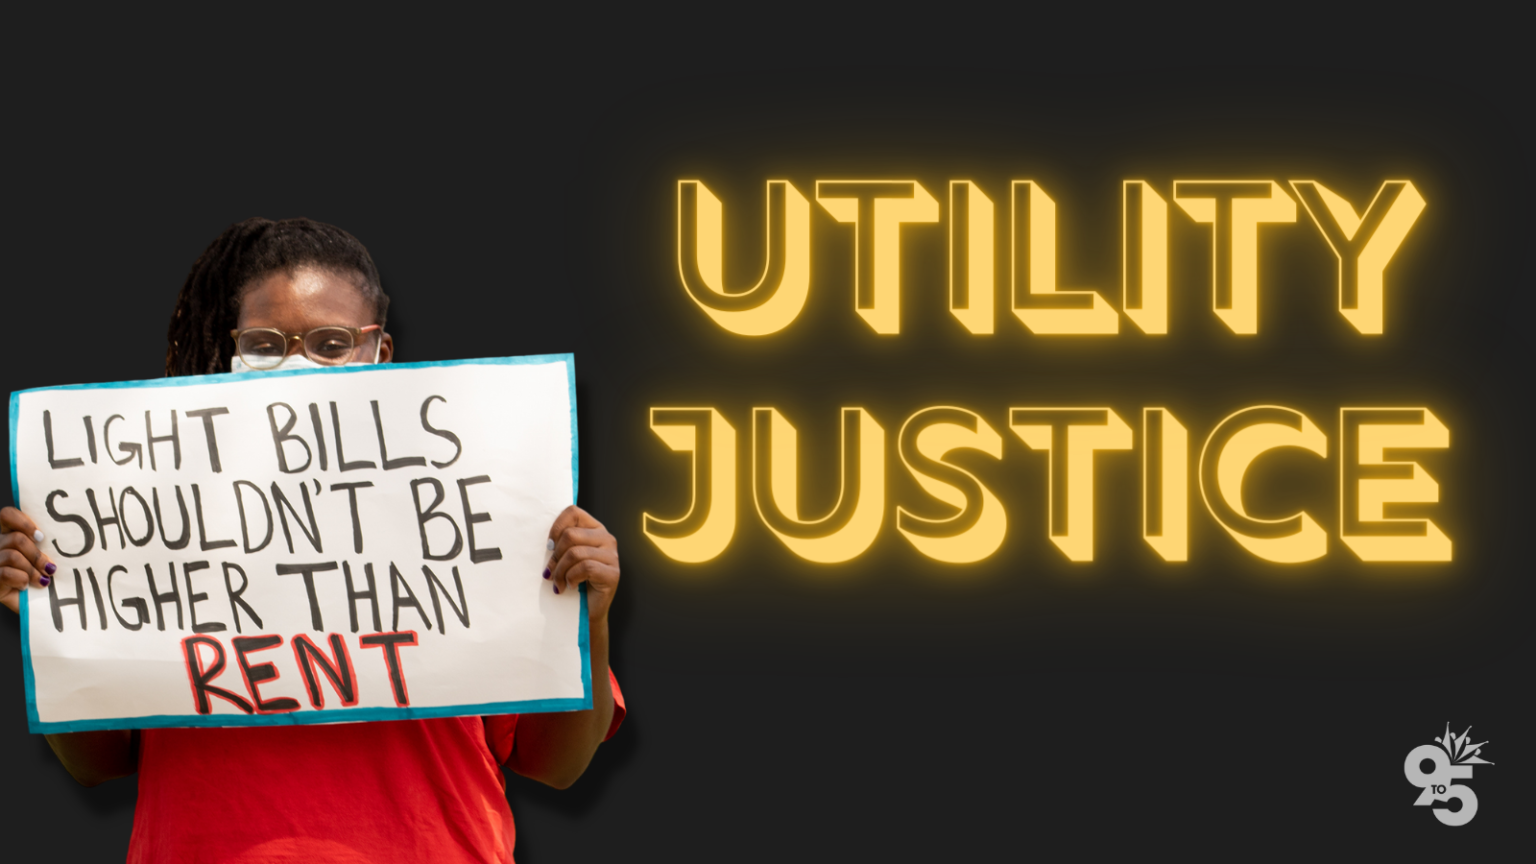 Utility Justice, image of a woman holding a sign that says light bills shouldn’t be higher than rent.